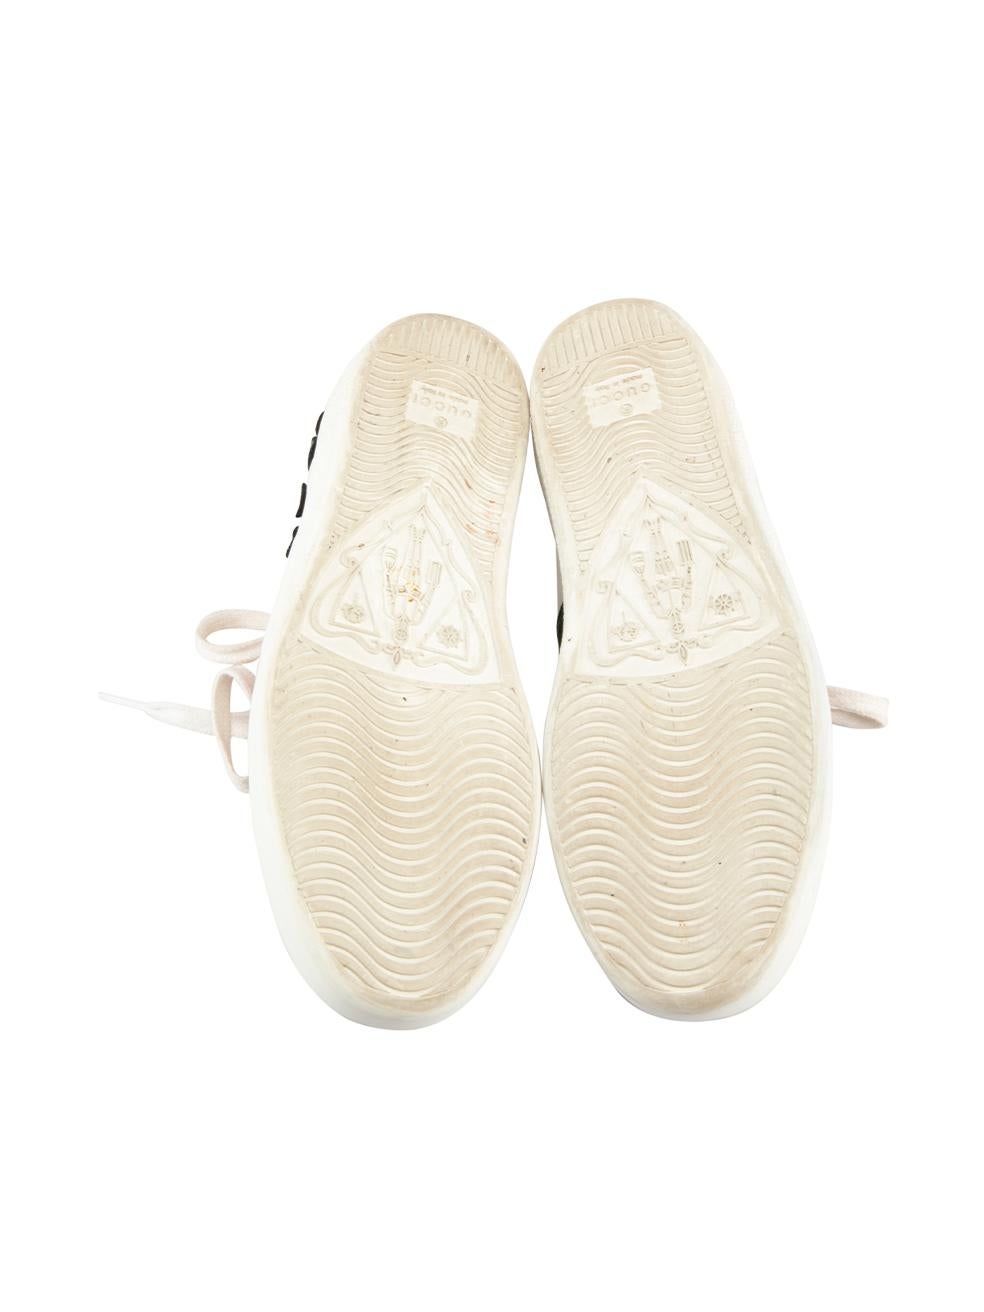 Women's Gucci White Floral Web Accent Trainers Size IT 35 For Sale